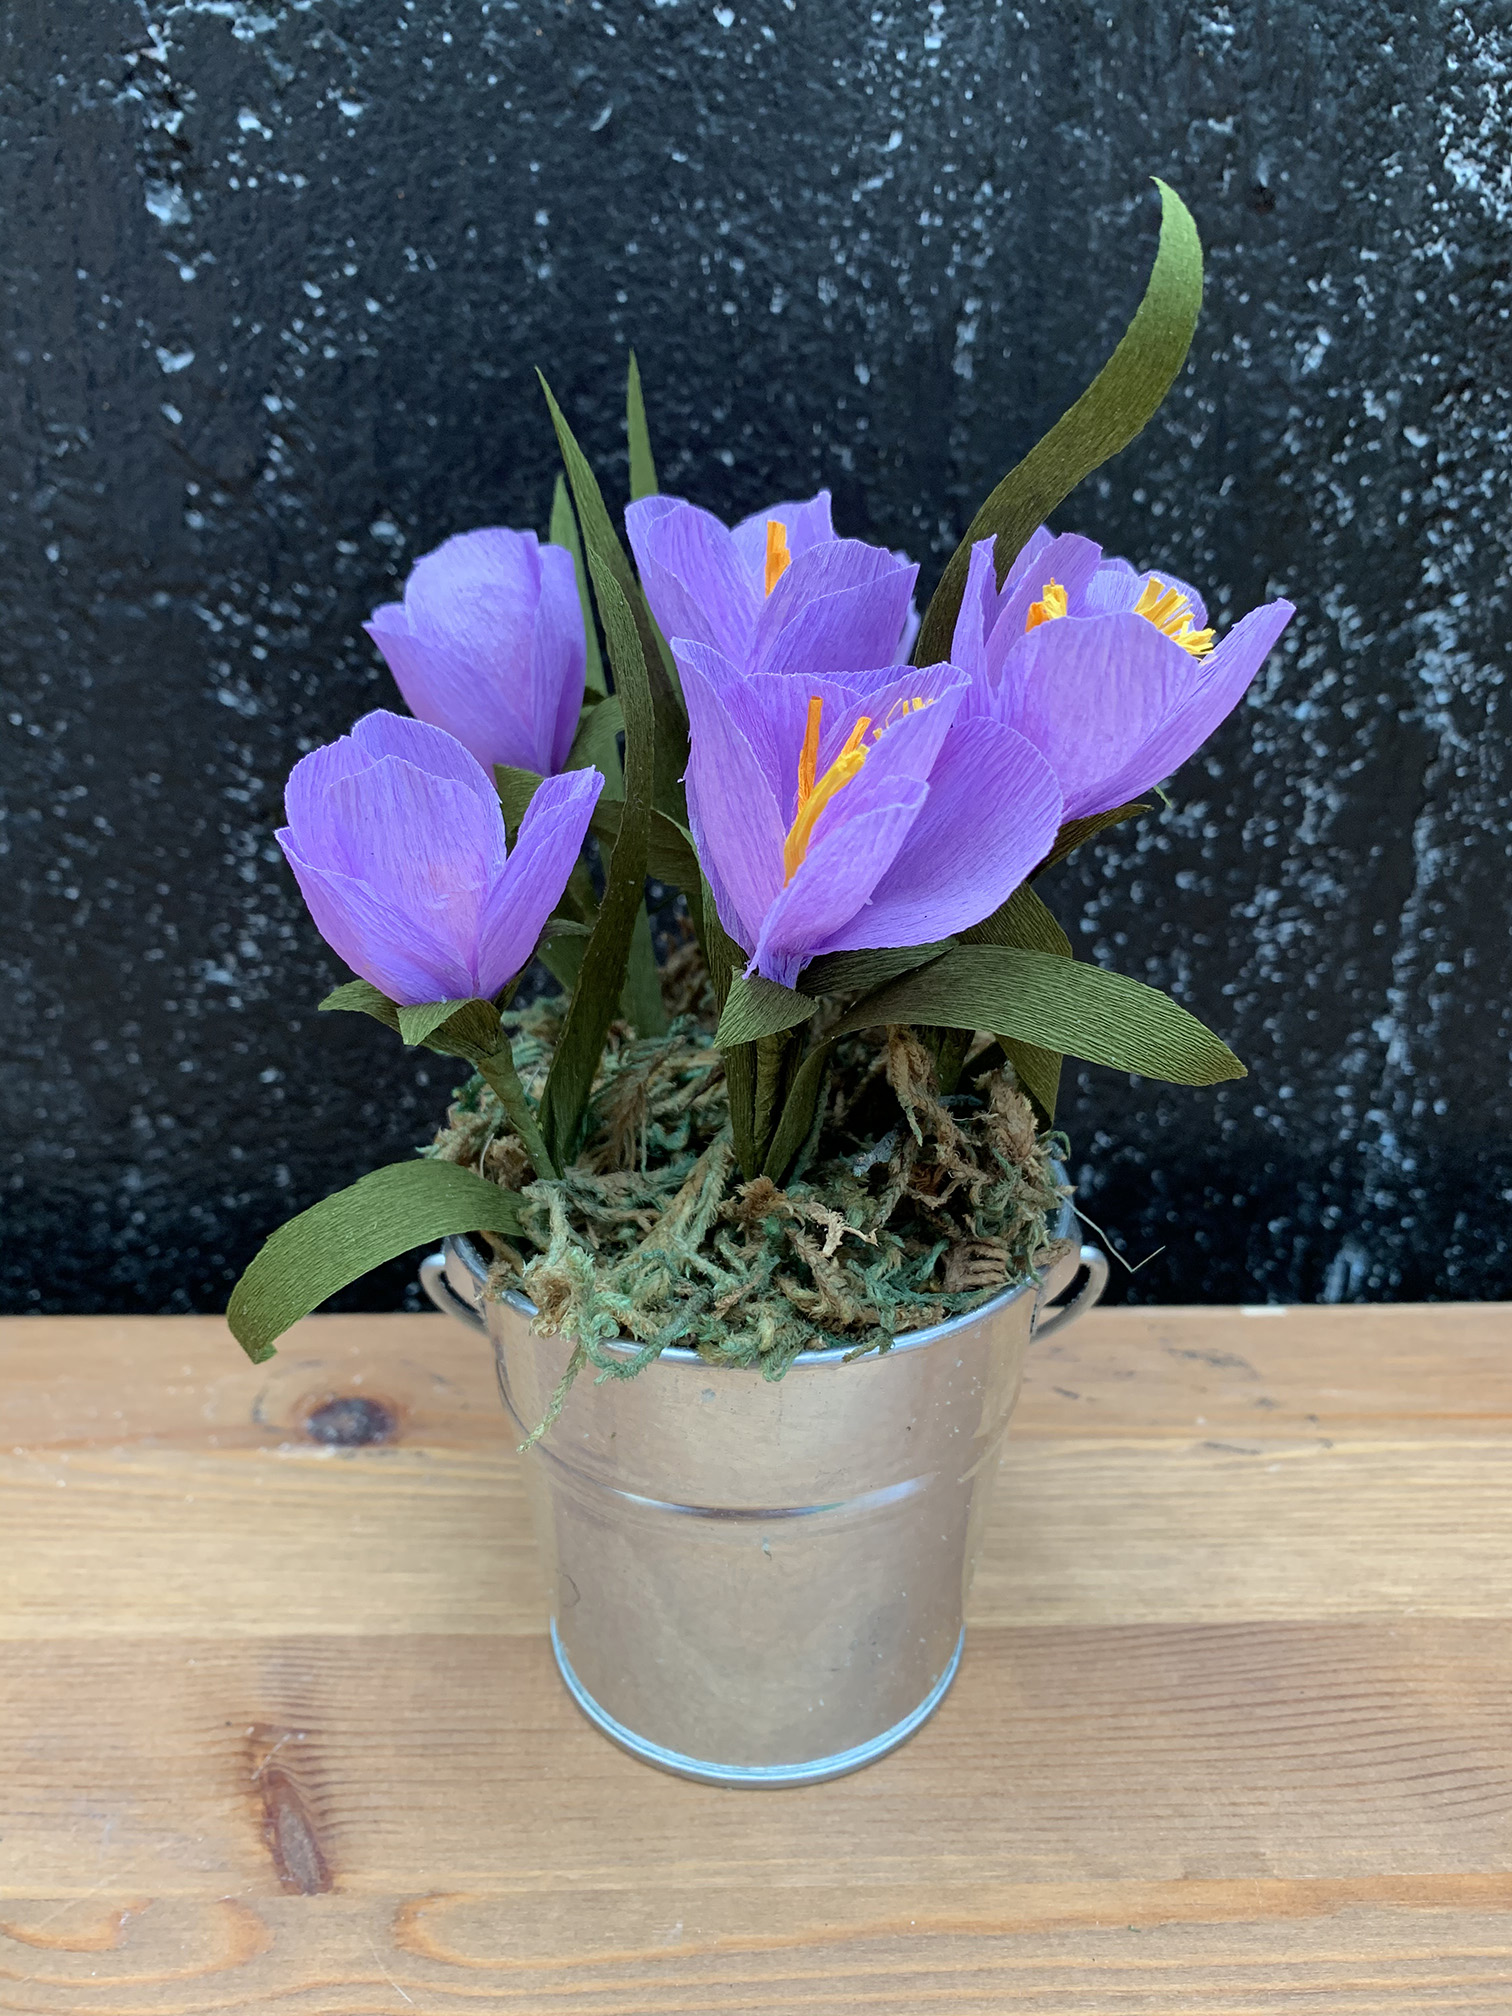 A flower pot of purple crocuses made out of crepe paper.